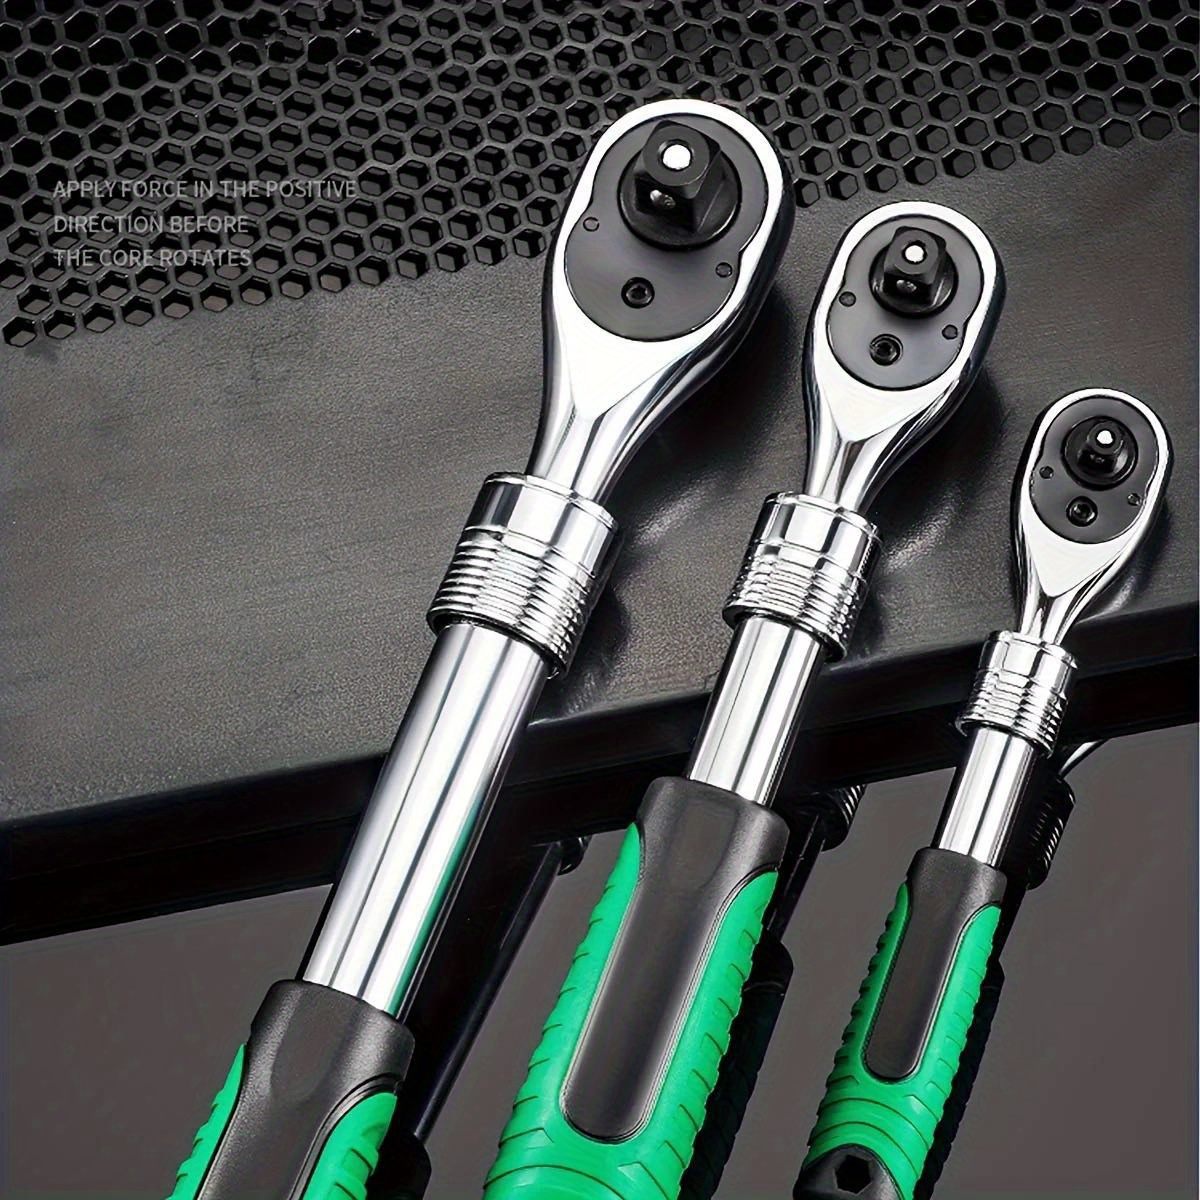 

1/4, 3/8, 1/2 Inches Drive Socket Ratchet Set Extendable Handle Wrench 72-tooth Quick-release Reversible